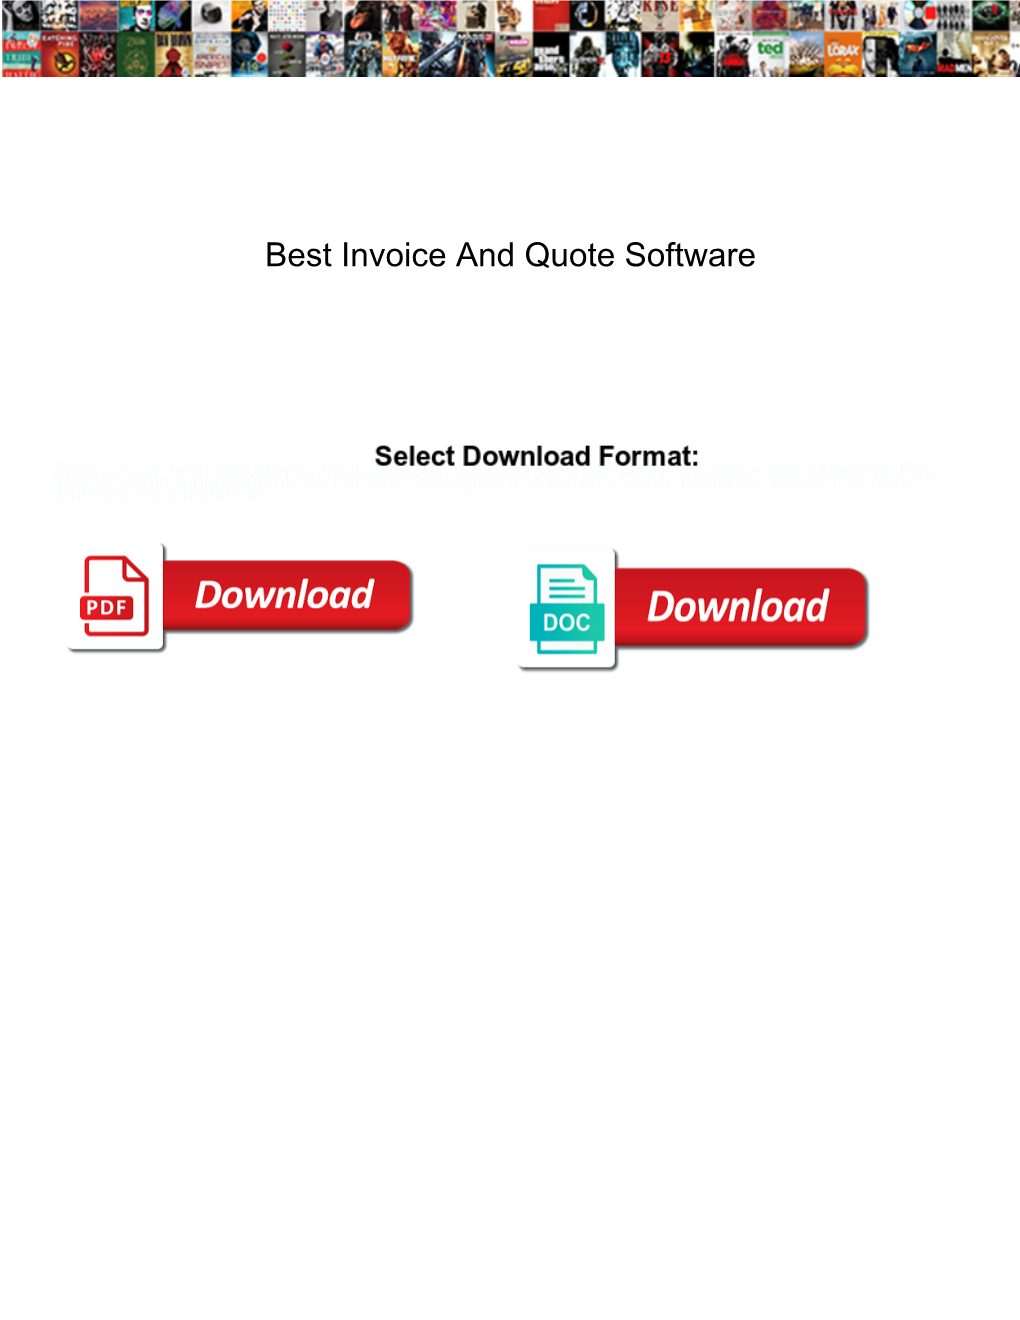 Best Invoice and Quote Software